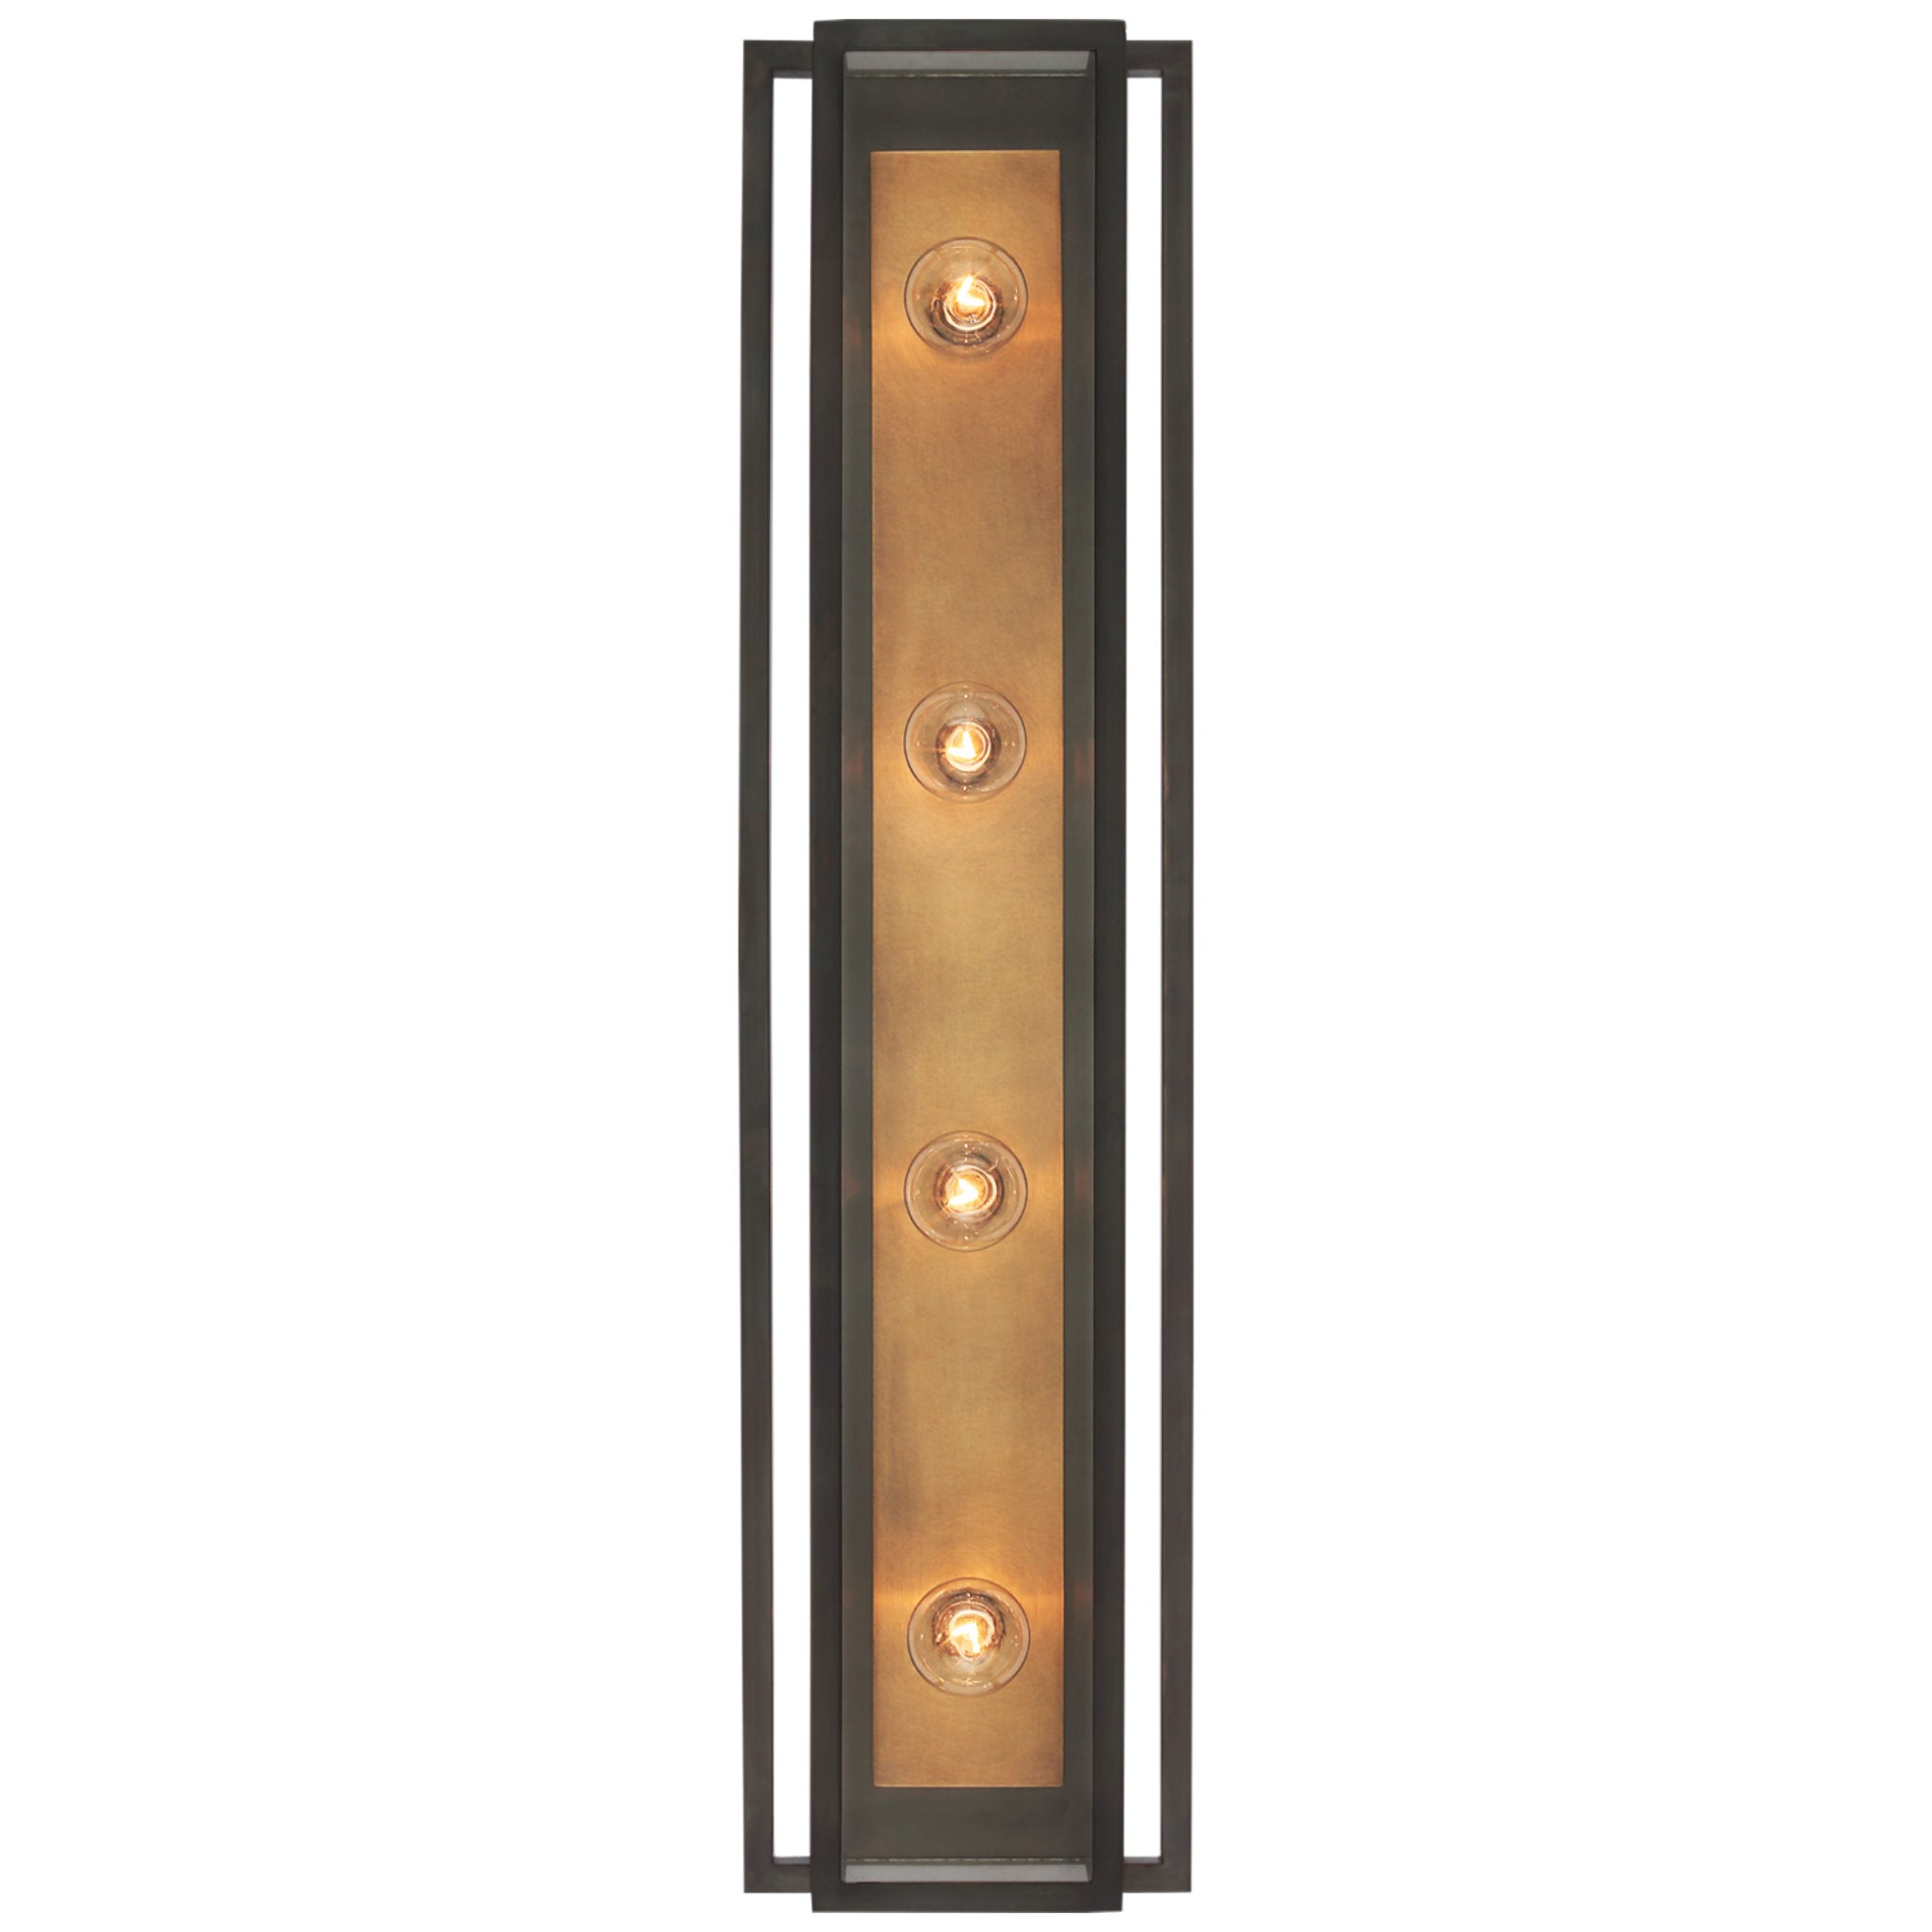 Ian K. Fowler Halle 30" Vanity Light in Bronze and Hand-Rubbed Antique Brass with Clear Glass